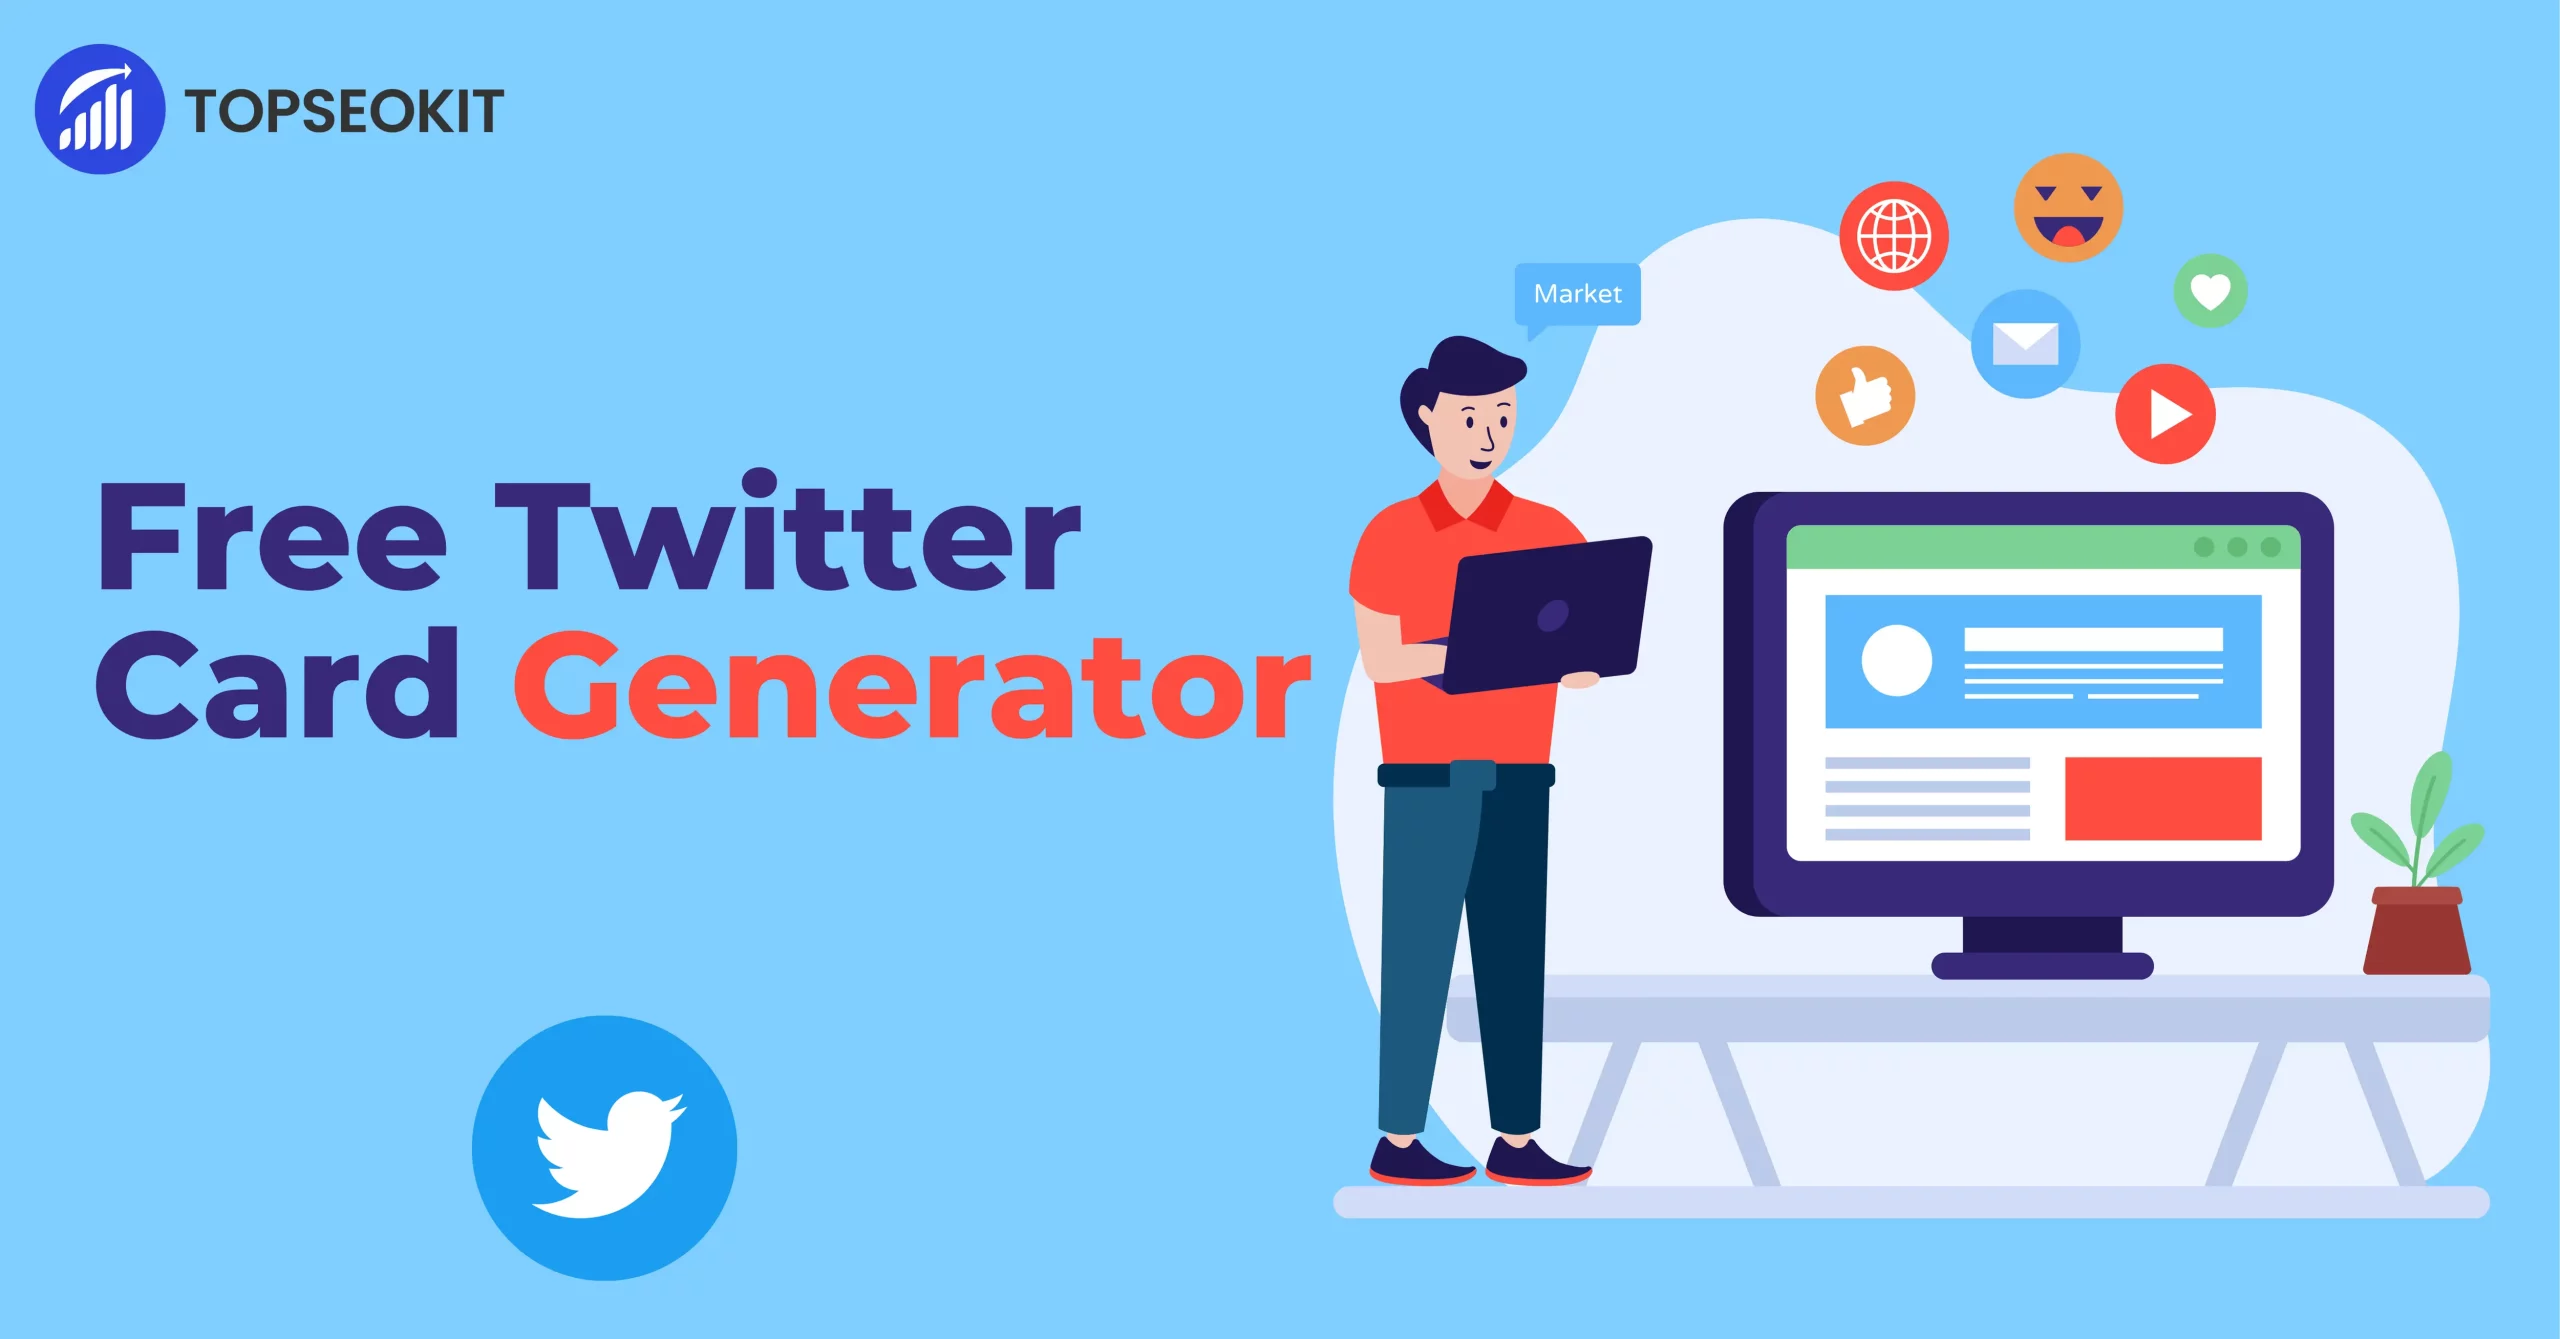 Guide to Free Card Generator for Twitter 